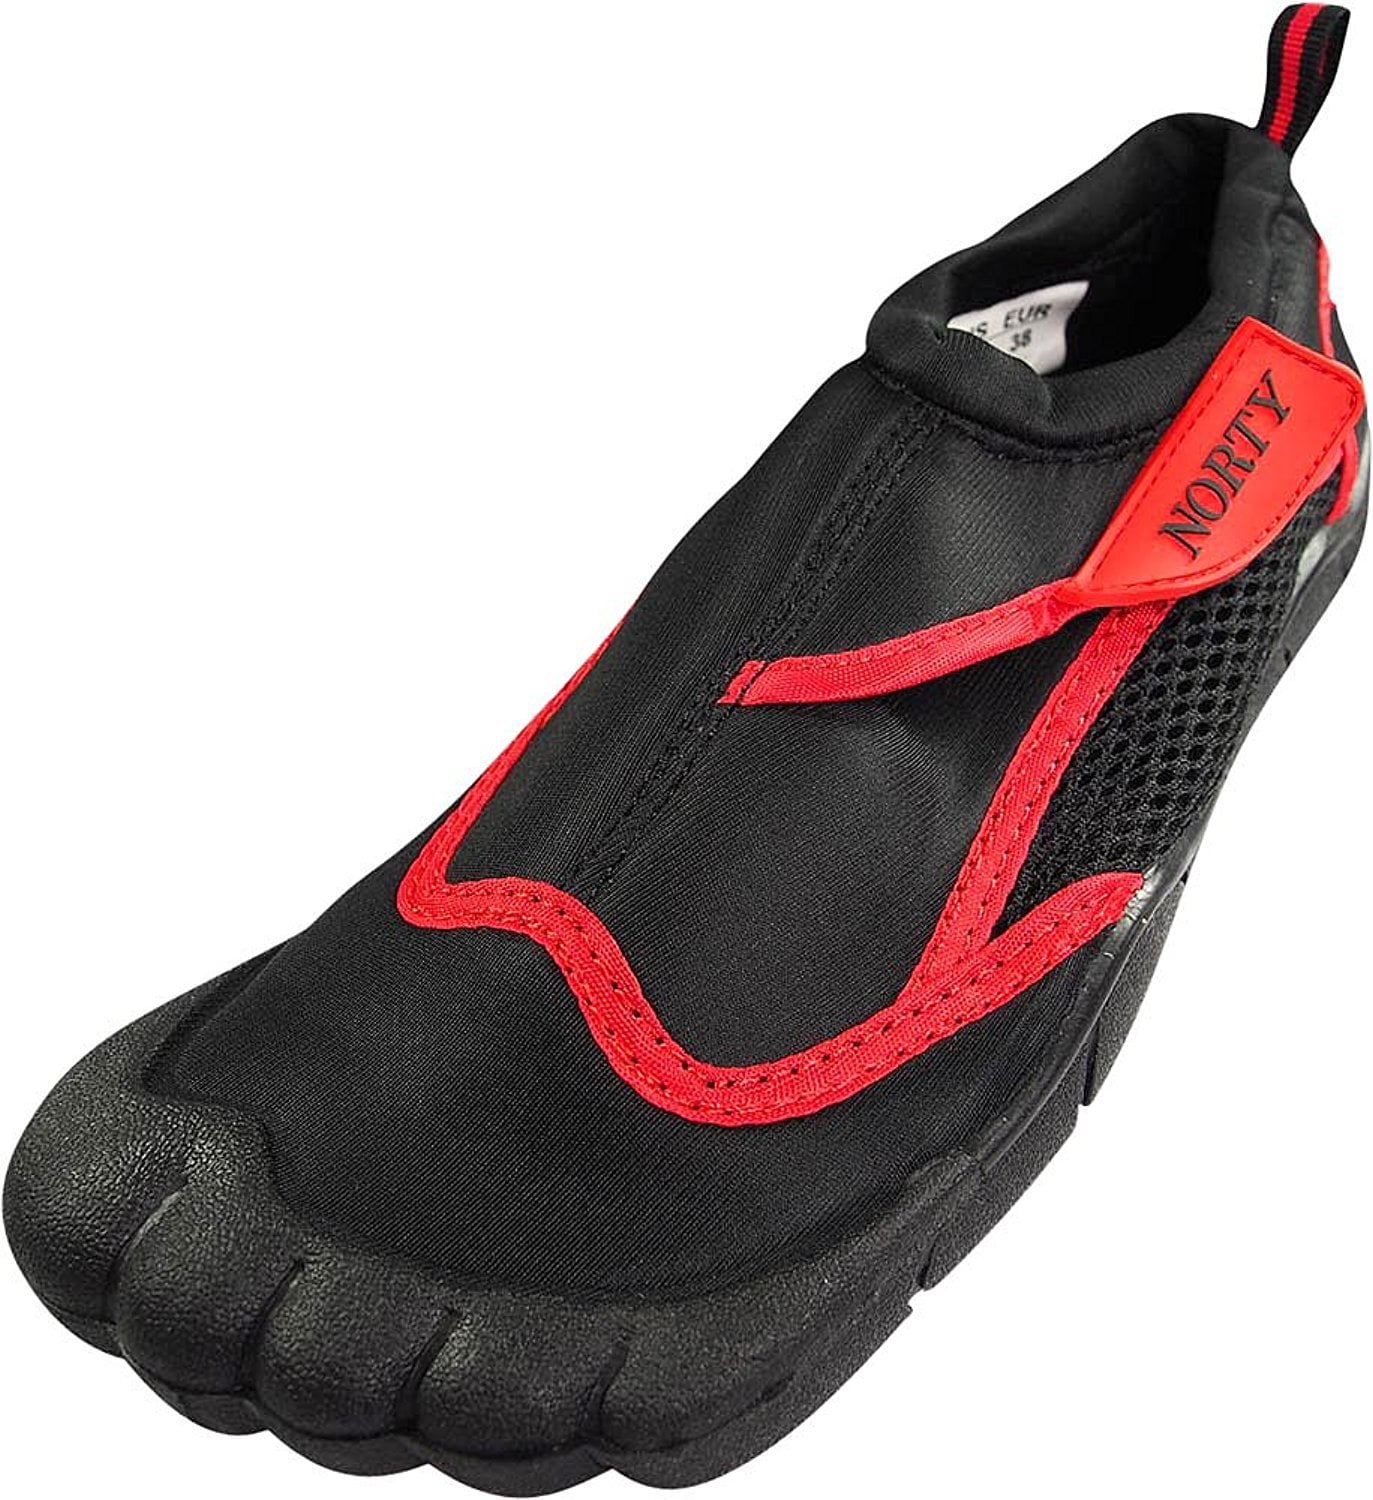 norty - young mens water shoe - mens 